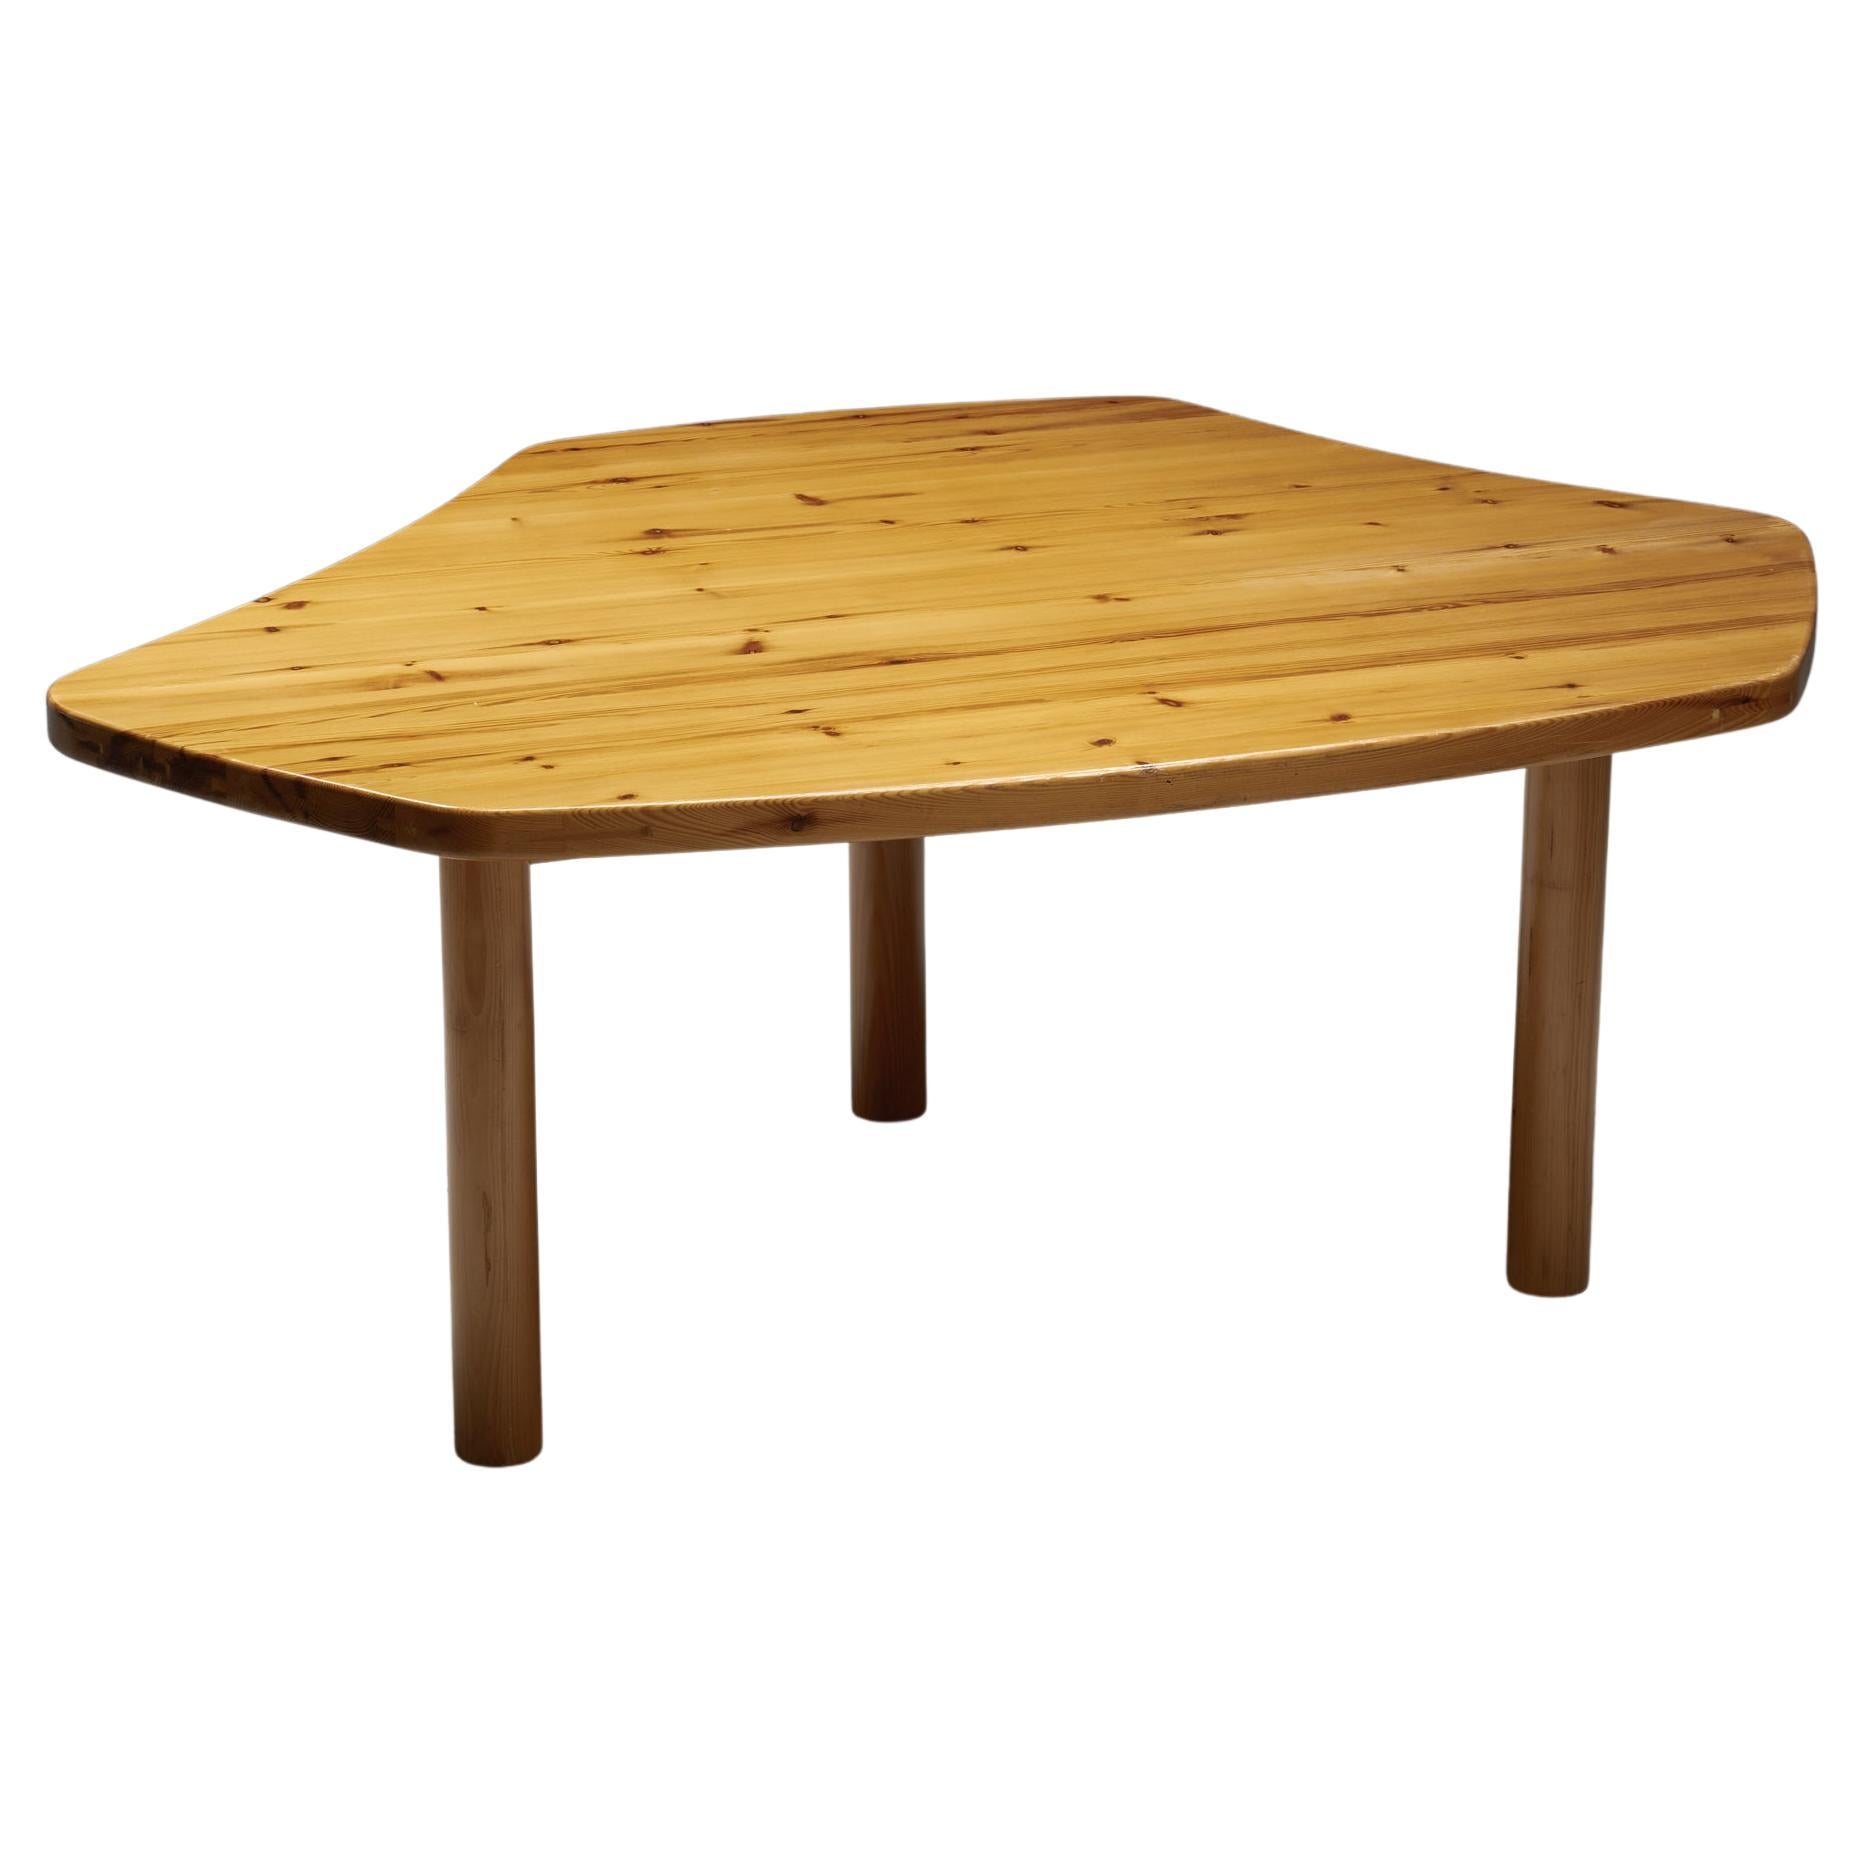 Atelier Français Perriand Les Arcs Style Dining Table, Mid-Century, 1960's For Sale